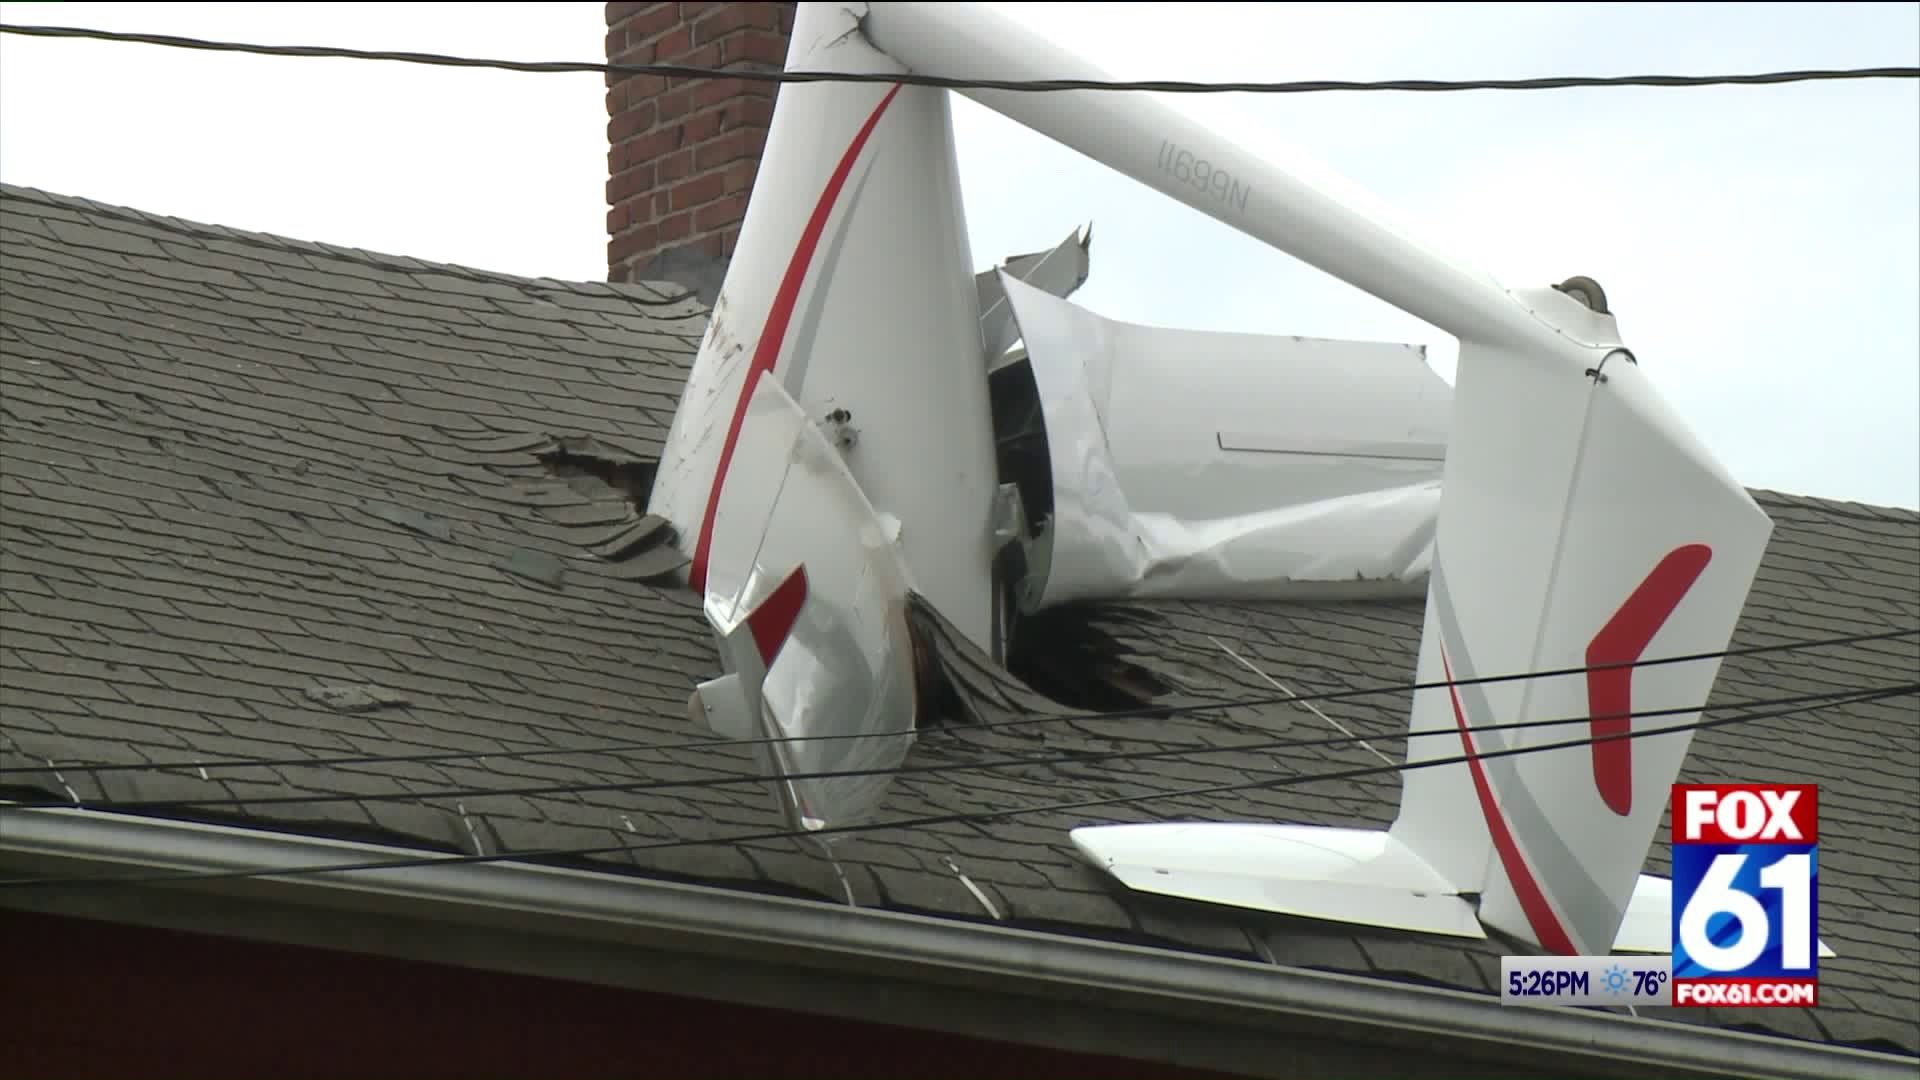 Mom speaks out after glider crashed into home